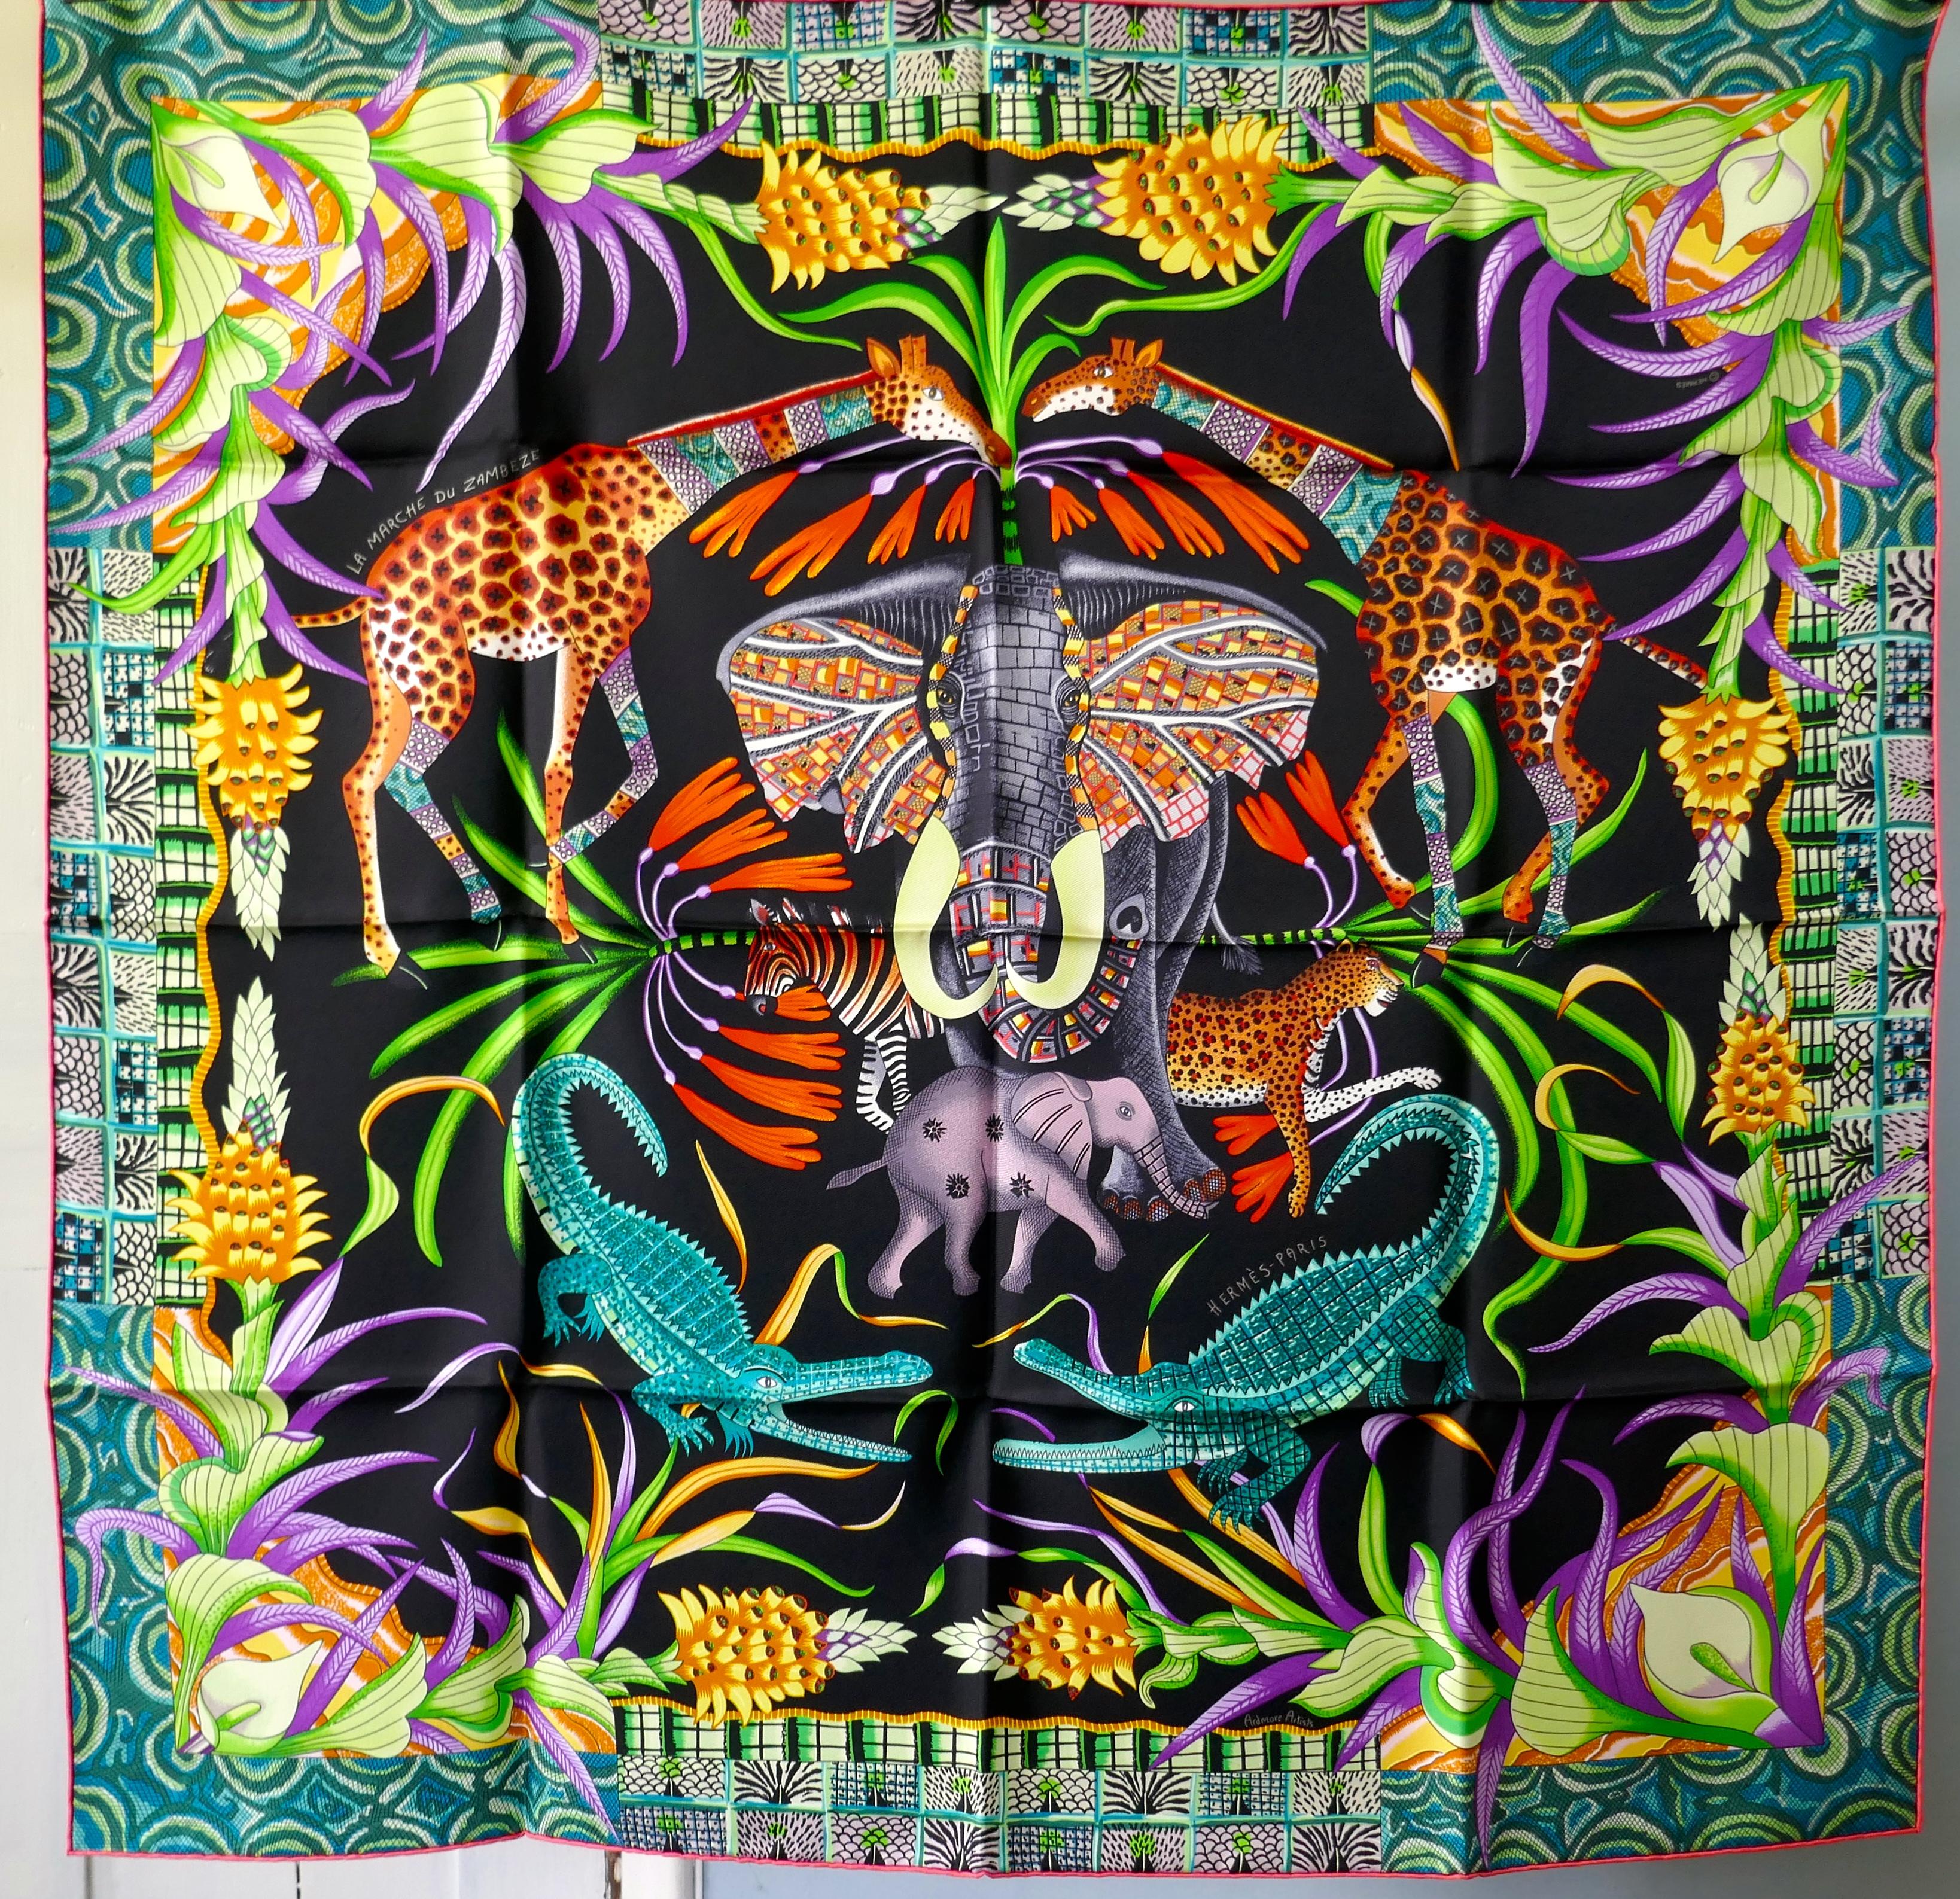 Rare Black HERMÈS Ardmore Artists design “La Marche du Zambeze” 100% Silk Scarf, 2016

 Authenticity Guaranteed made in France by Hermes and called La Marche du Zambeze in stunning Black palette, offered here unused with all its tags, plump hand